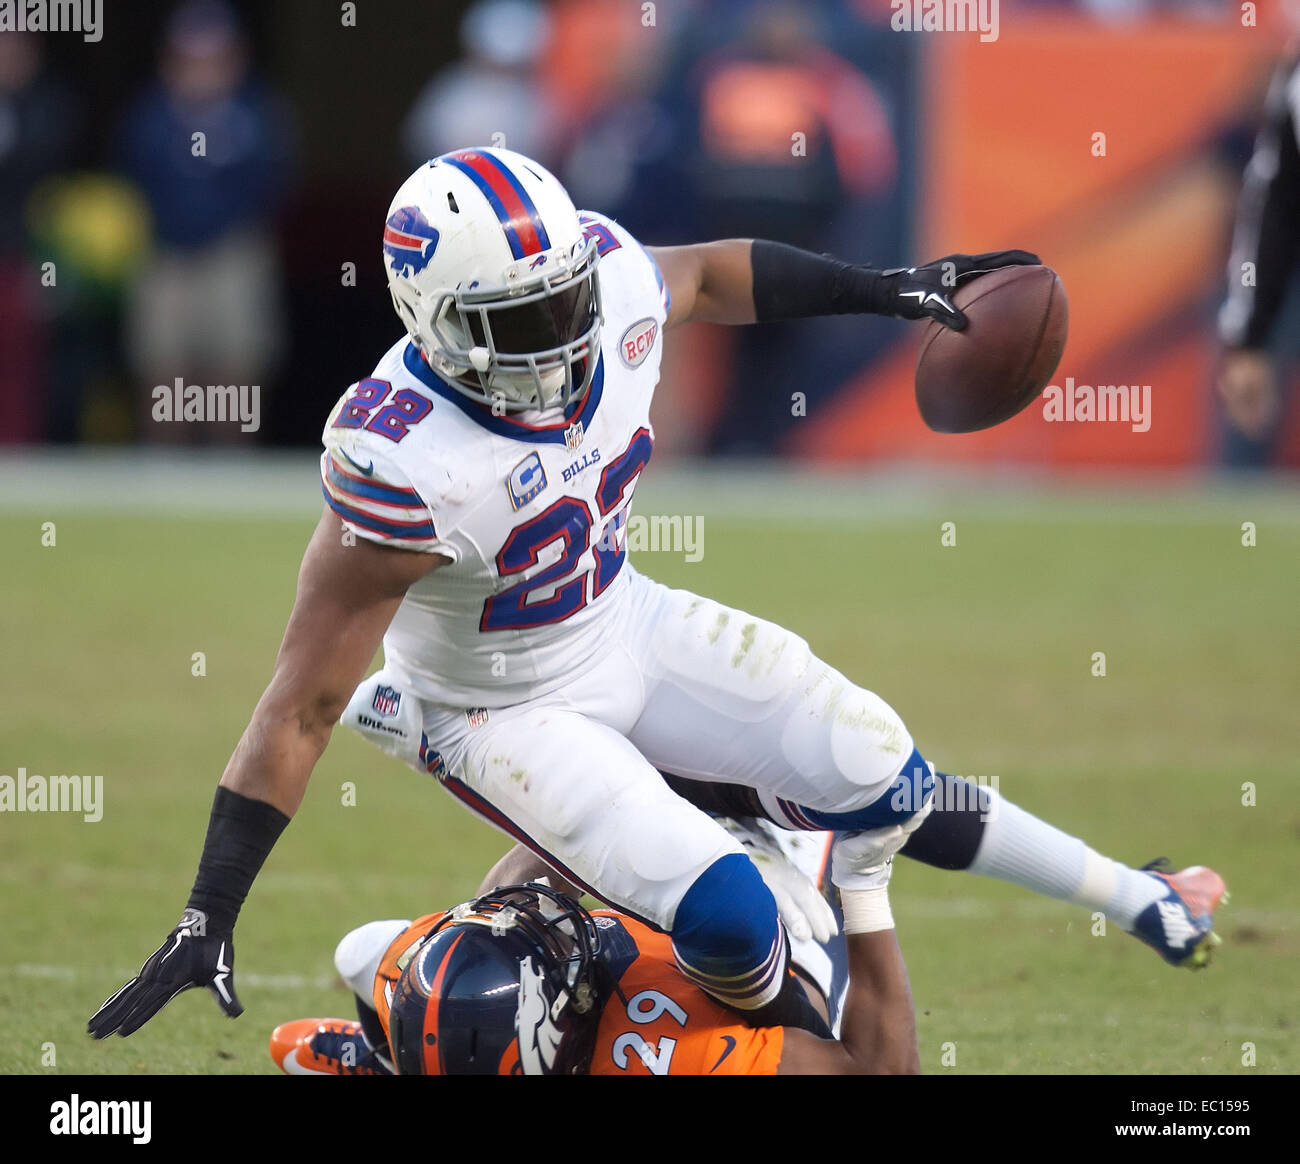 Denver, Colorado, USA. 7th Dec, 2014. Bills RB FRED JACKSON, center, runs for yardage as he tackled by Broncos CB BRADLEY ROBY, bottom, during the 2nd. Half at Sports Authority Field at Mile High Sunday afternoon. The Broncos beat the Bills 24-17. Credit:  Hector Acevedo/ZUMA Wire/Alamy Live News Stock Photo